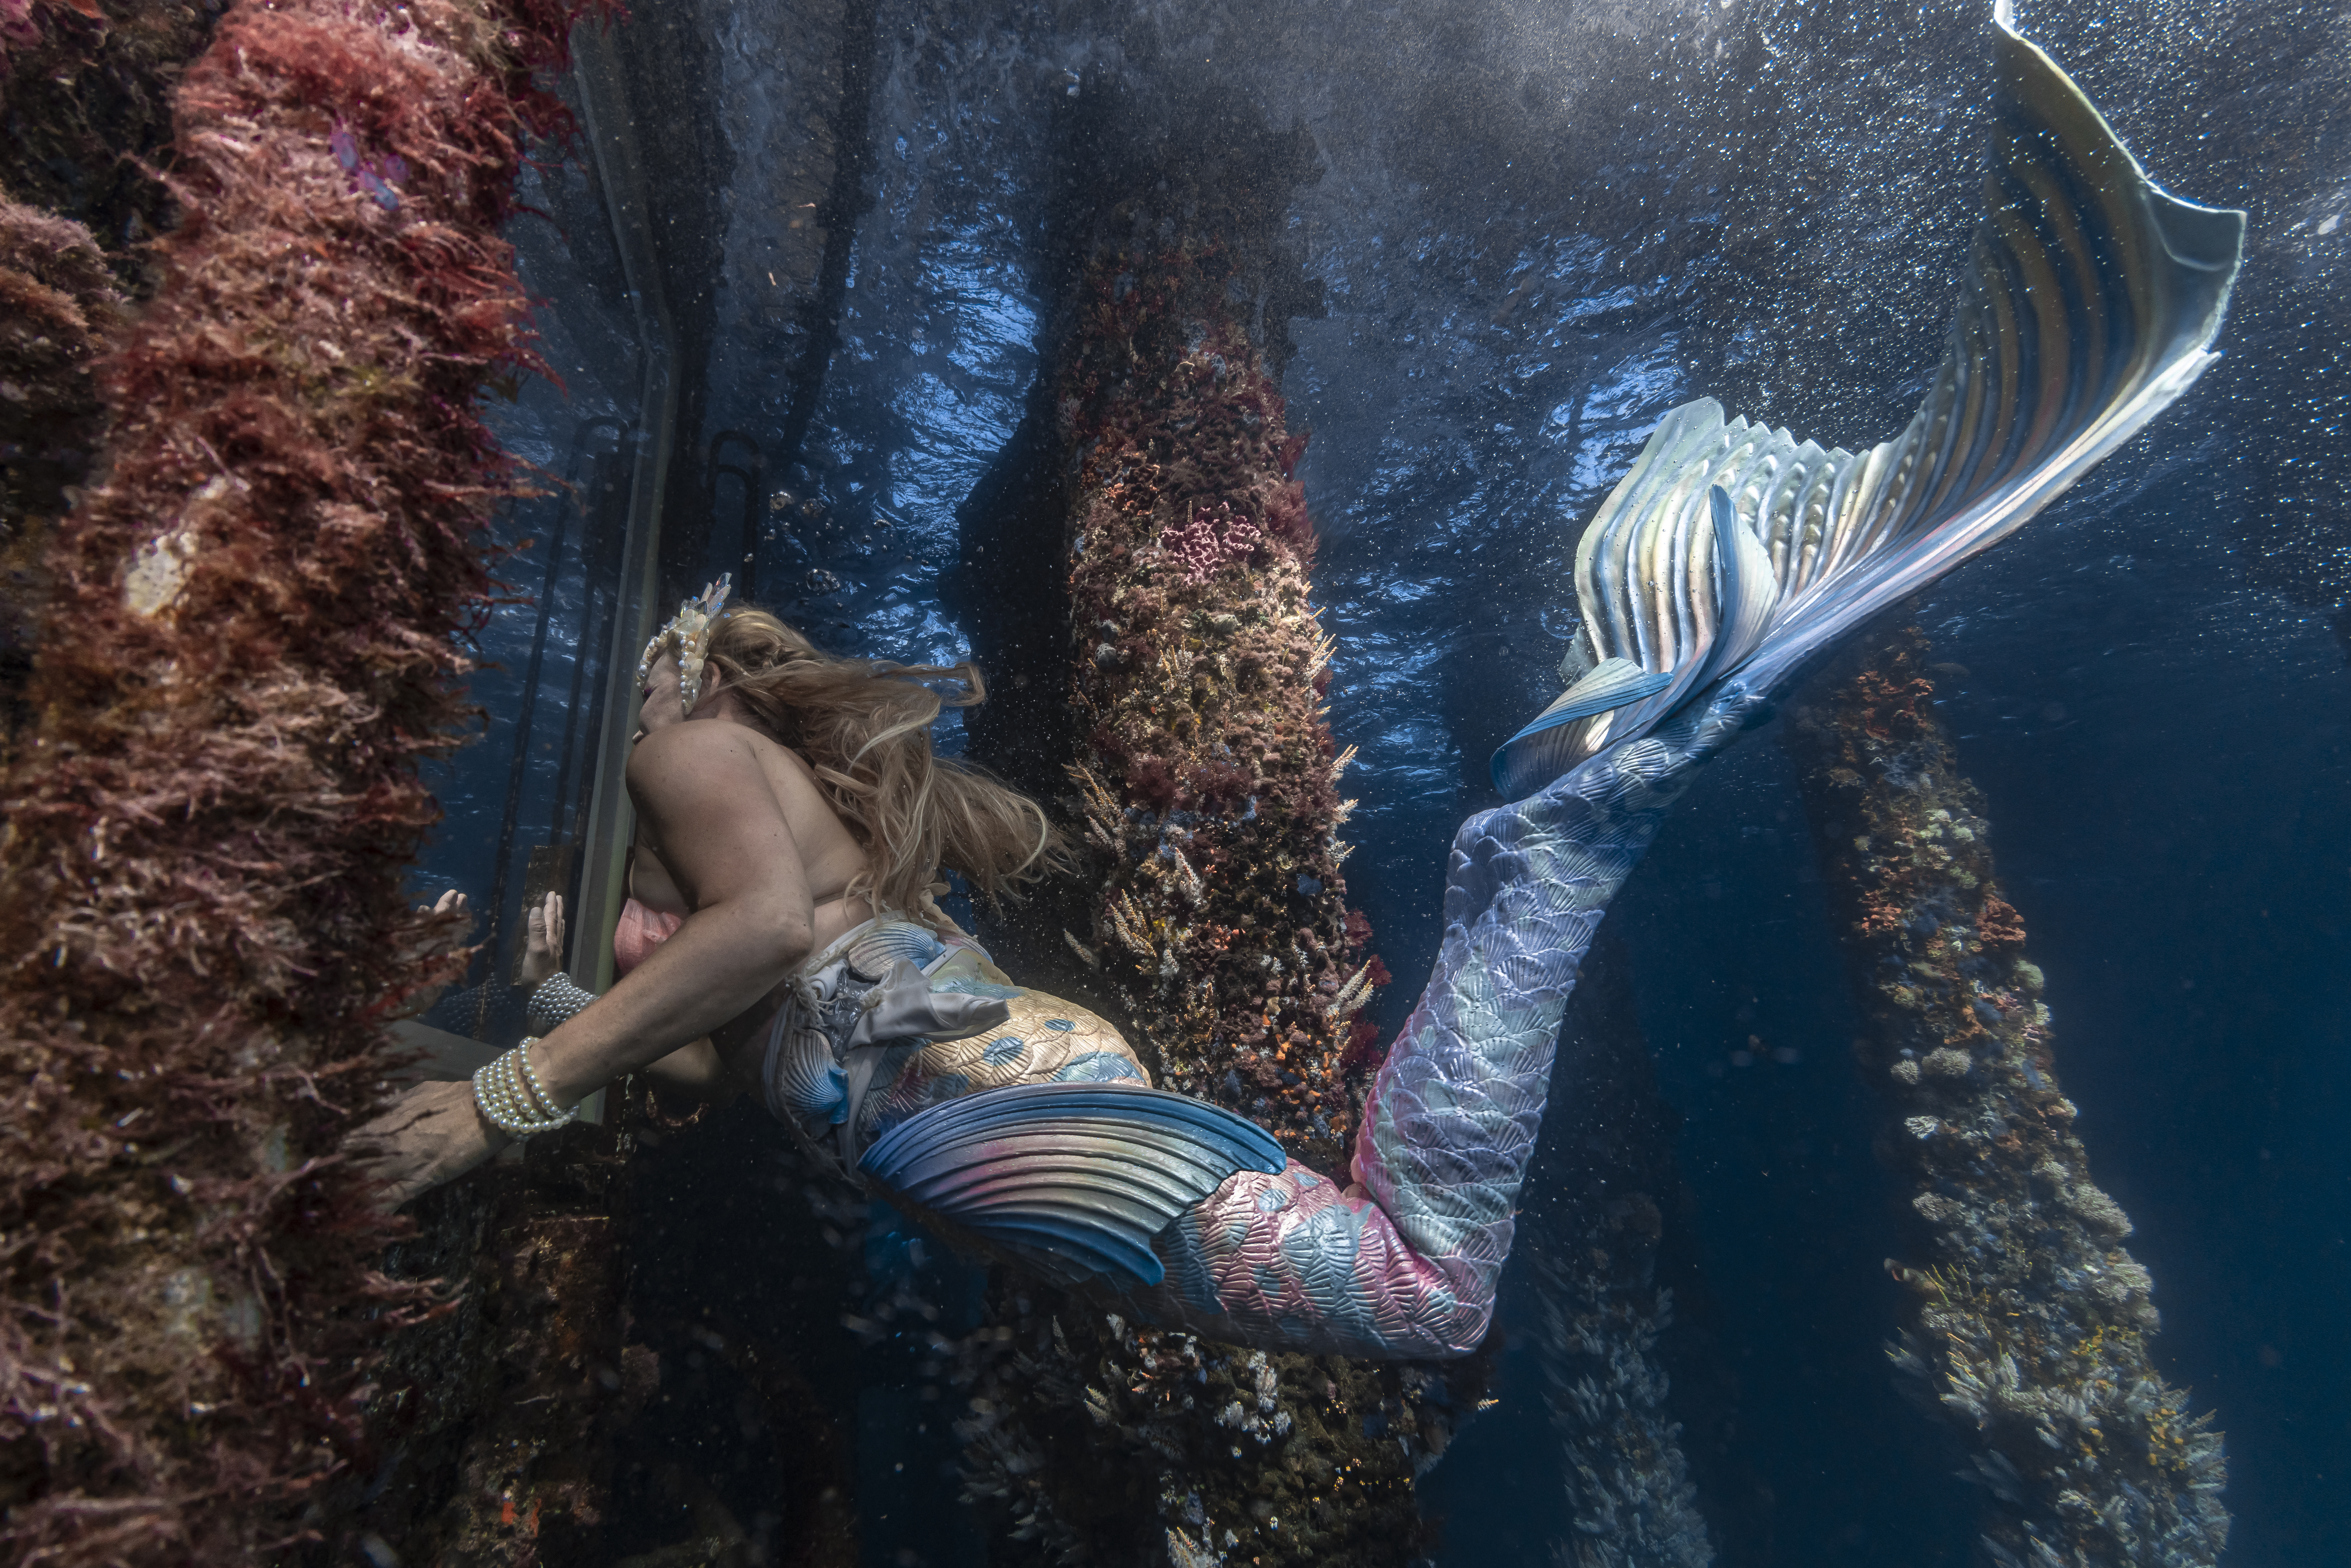 A Mermaid with a blue, pink and yellow tail swimming underwater, waving to Underwater Observatory visitors through the window.